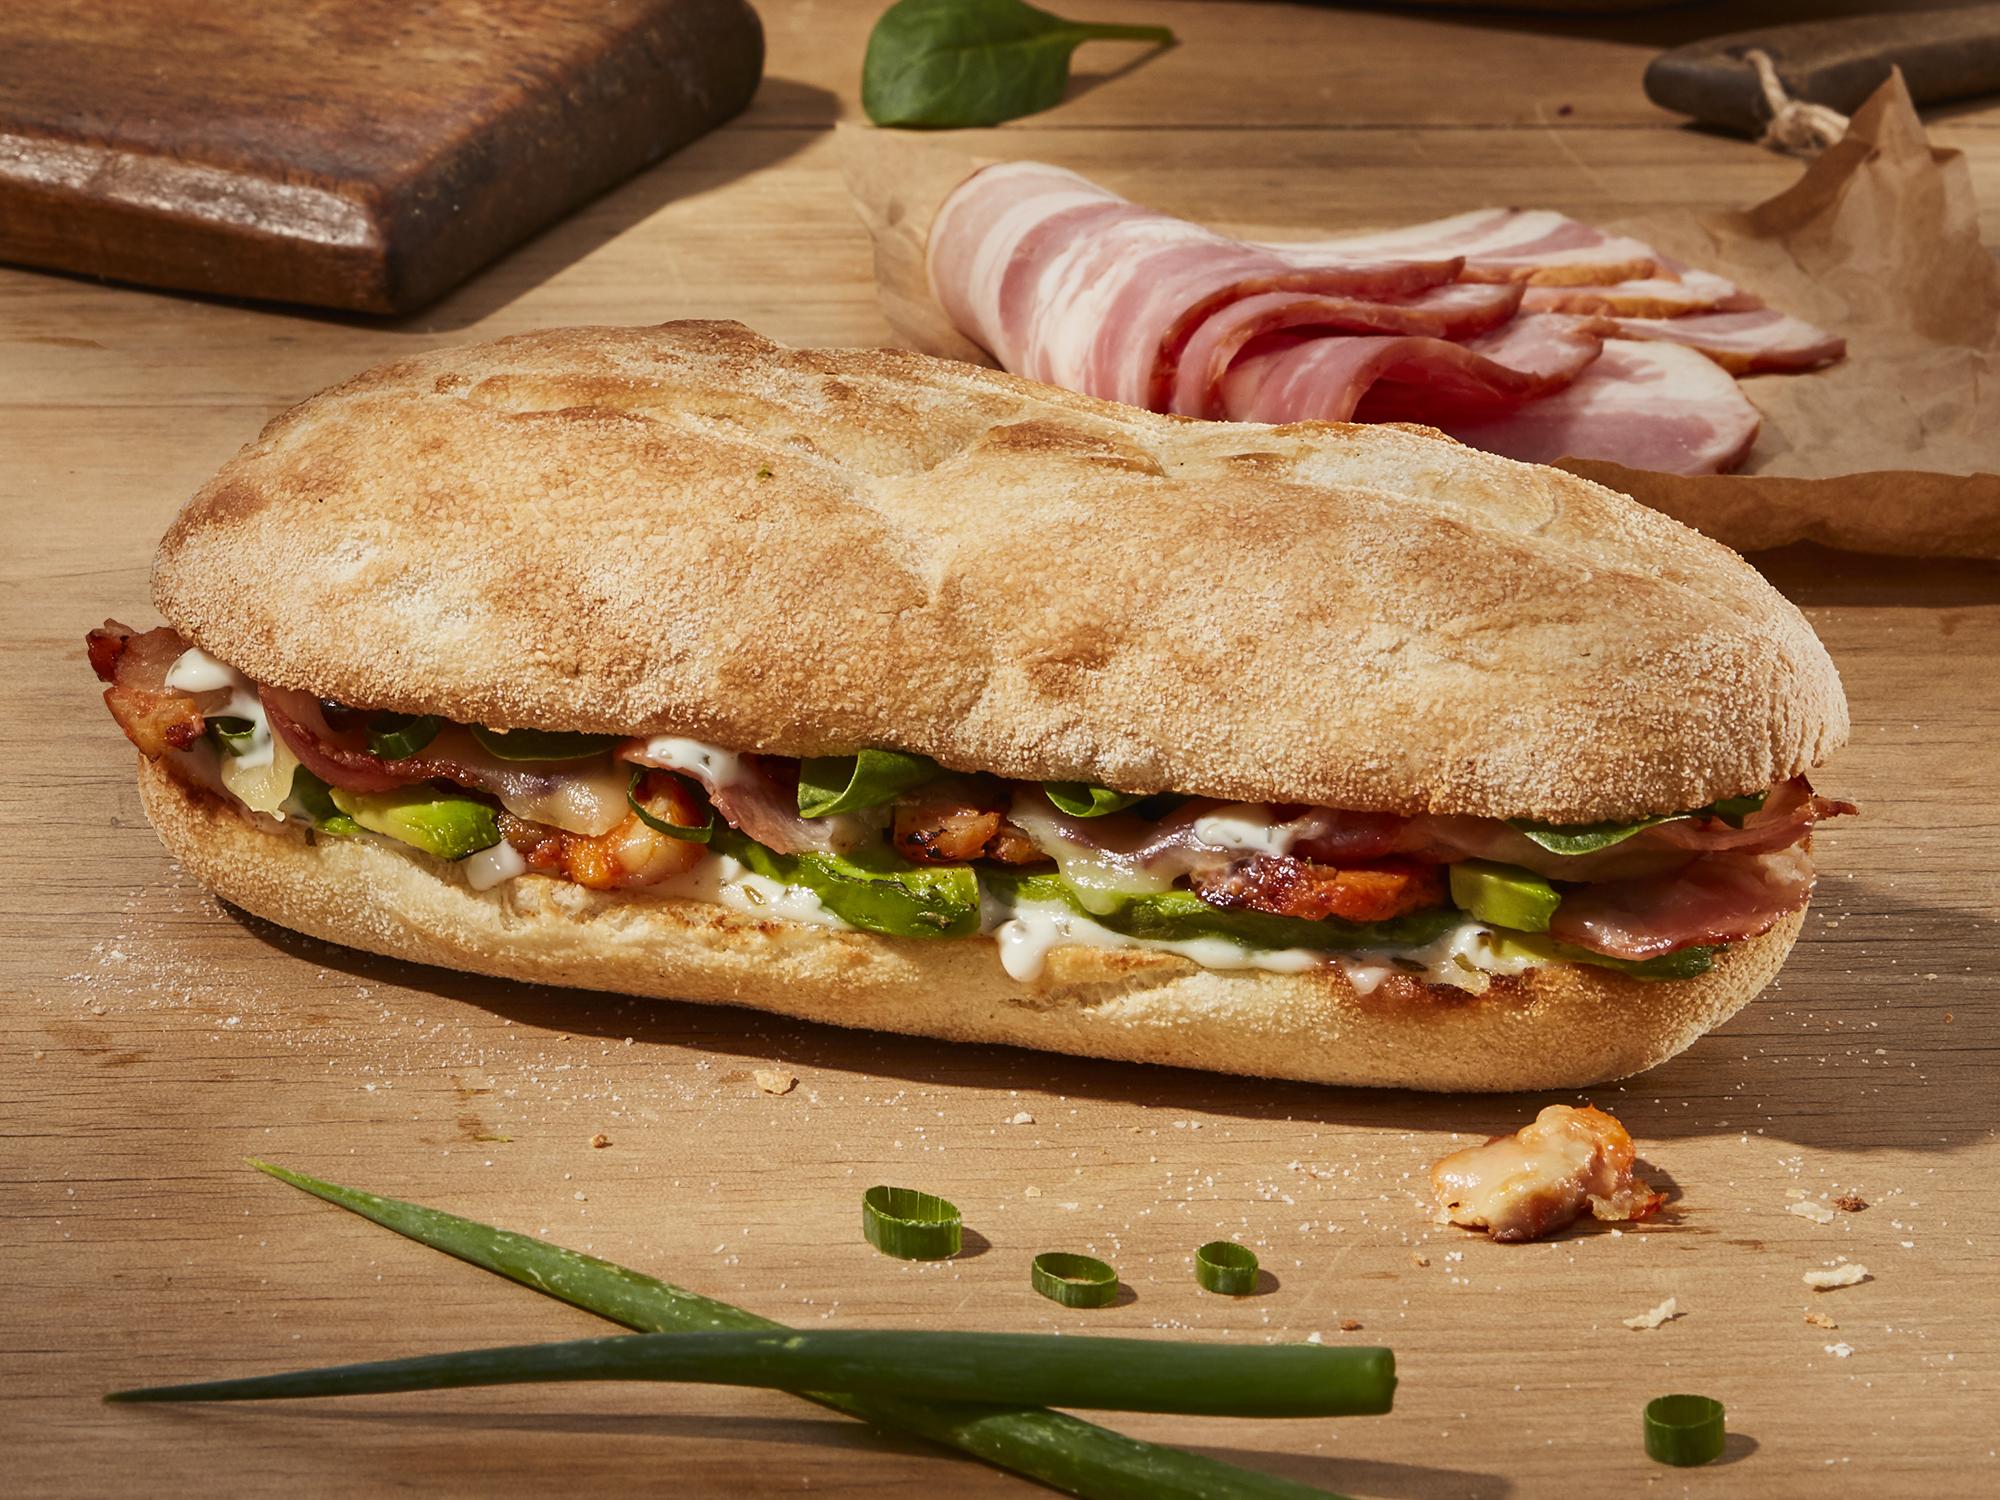 Domino's Australia launches oven-baked sandwiches | The Independent